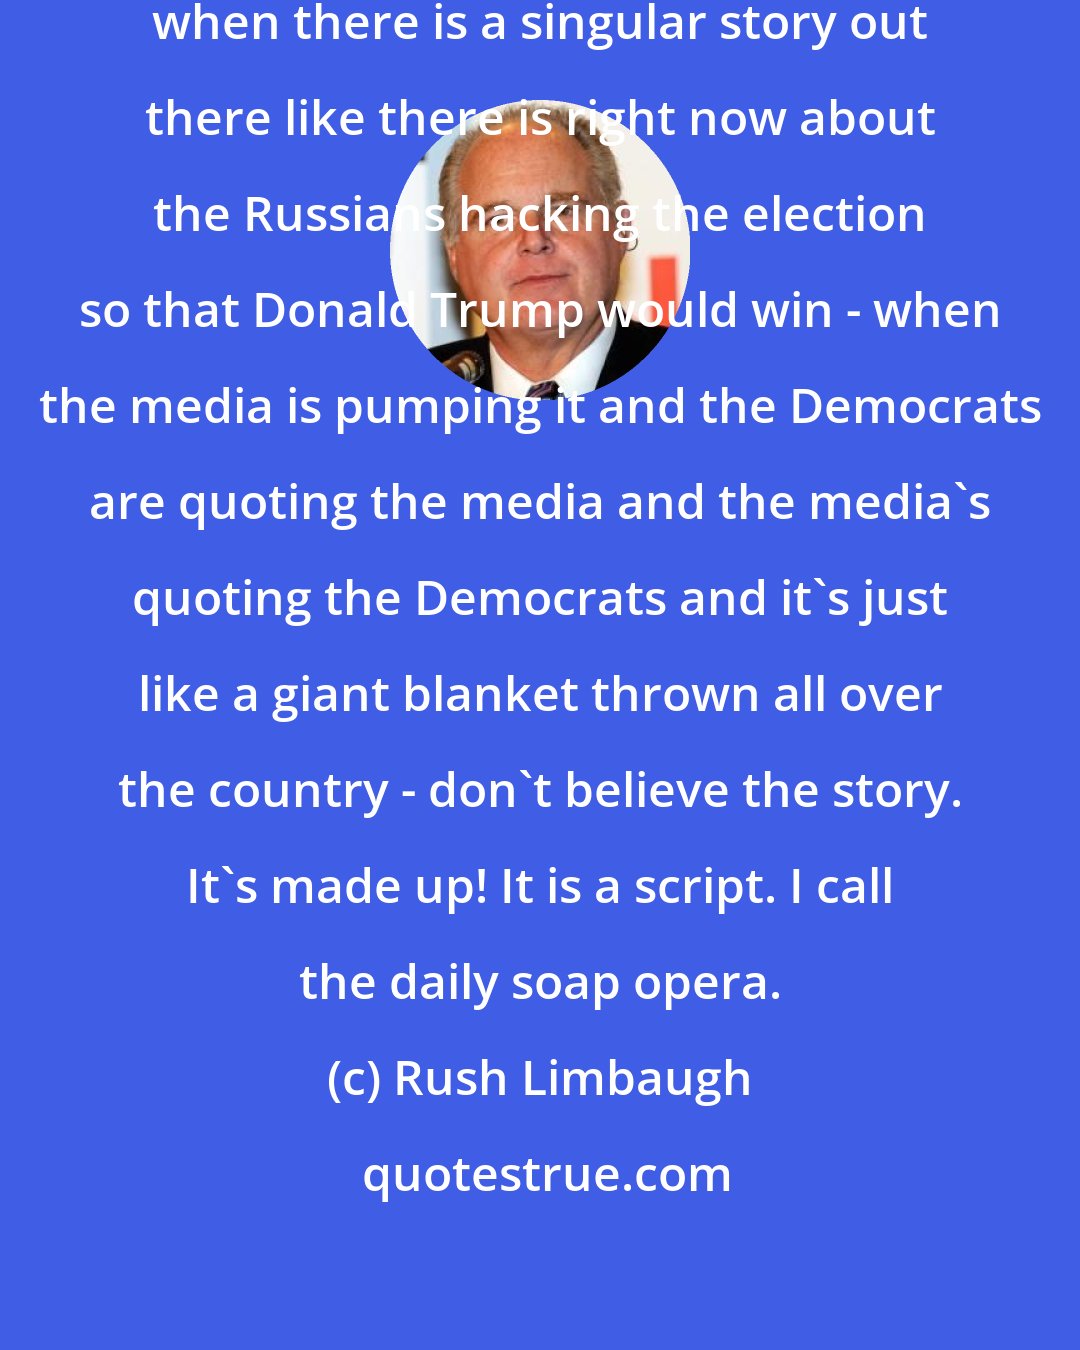 Rush Limbaugh: When there is this giant narrative, when there is a singular story out there like there is right now about the Russians hacking the election so that Donald Trump would win - when the media is pumping it and the Democrats are quoting the media and the media's quoting the Democrats and it's just like a giant blanket thrown all over the country - don't believe the story. It's made up! It is a script. I call the daily soap opera.